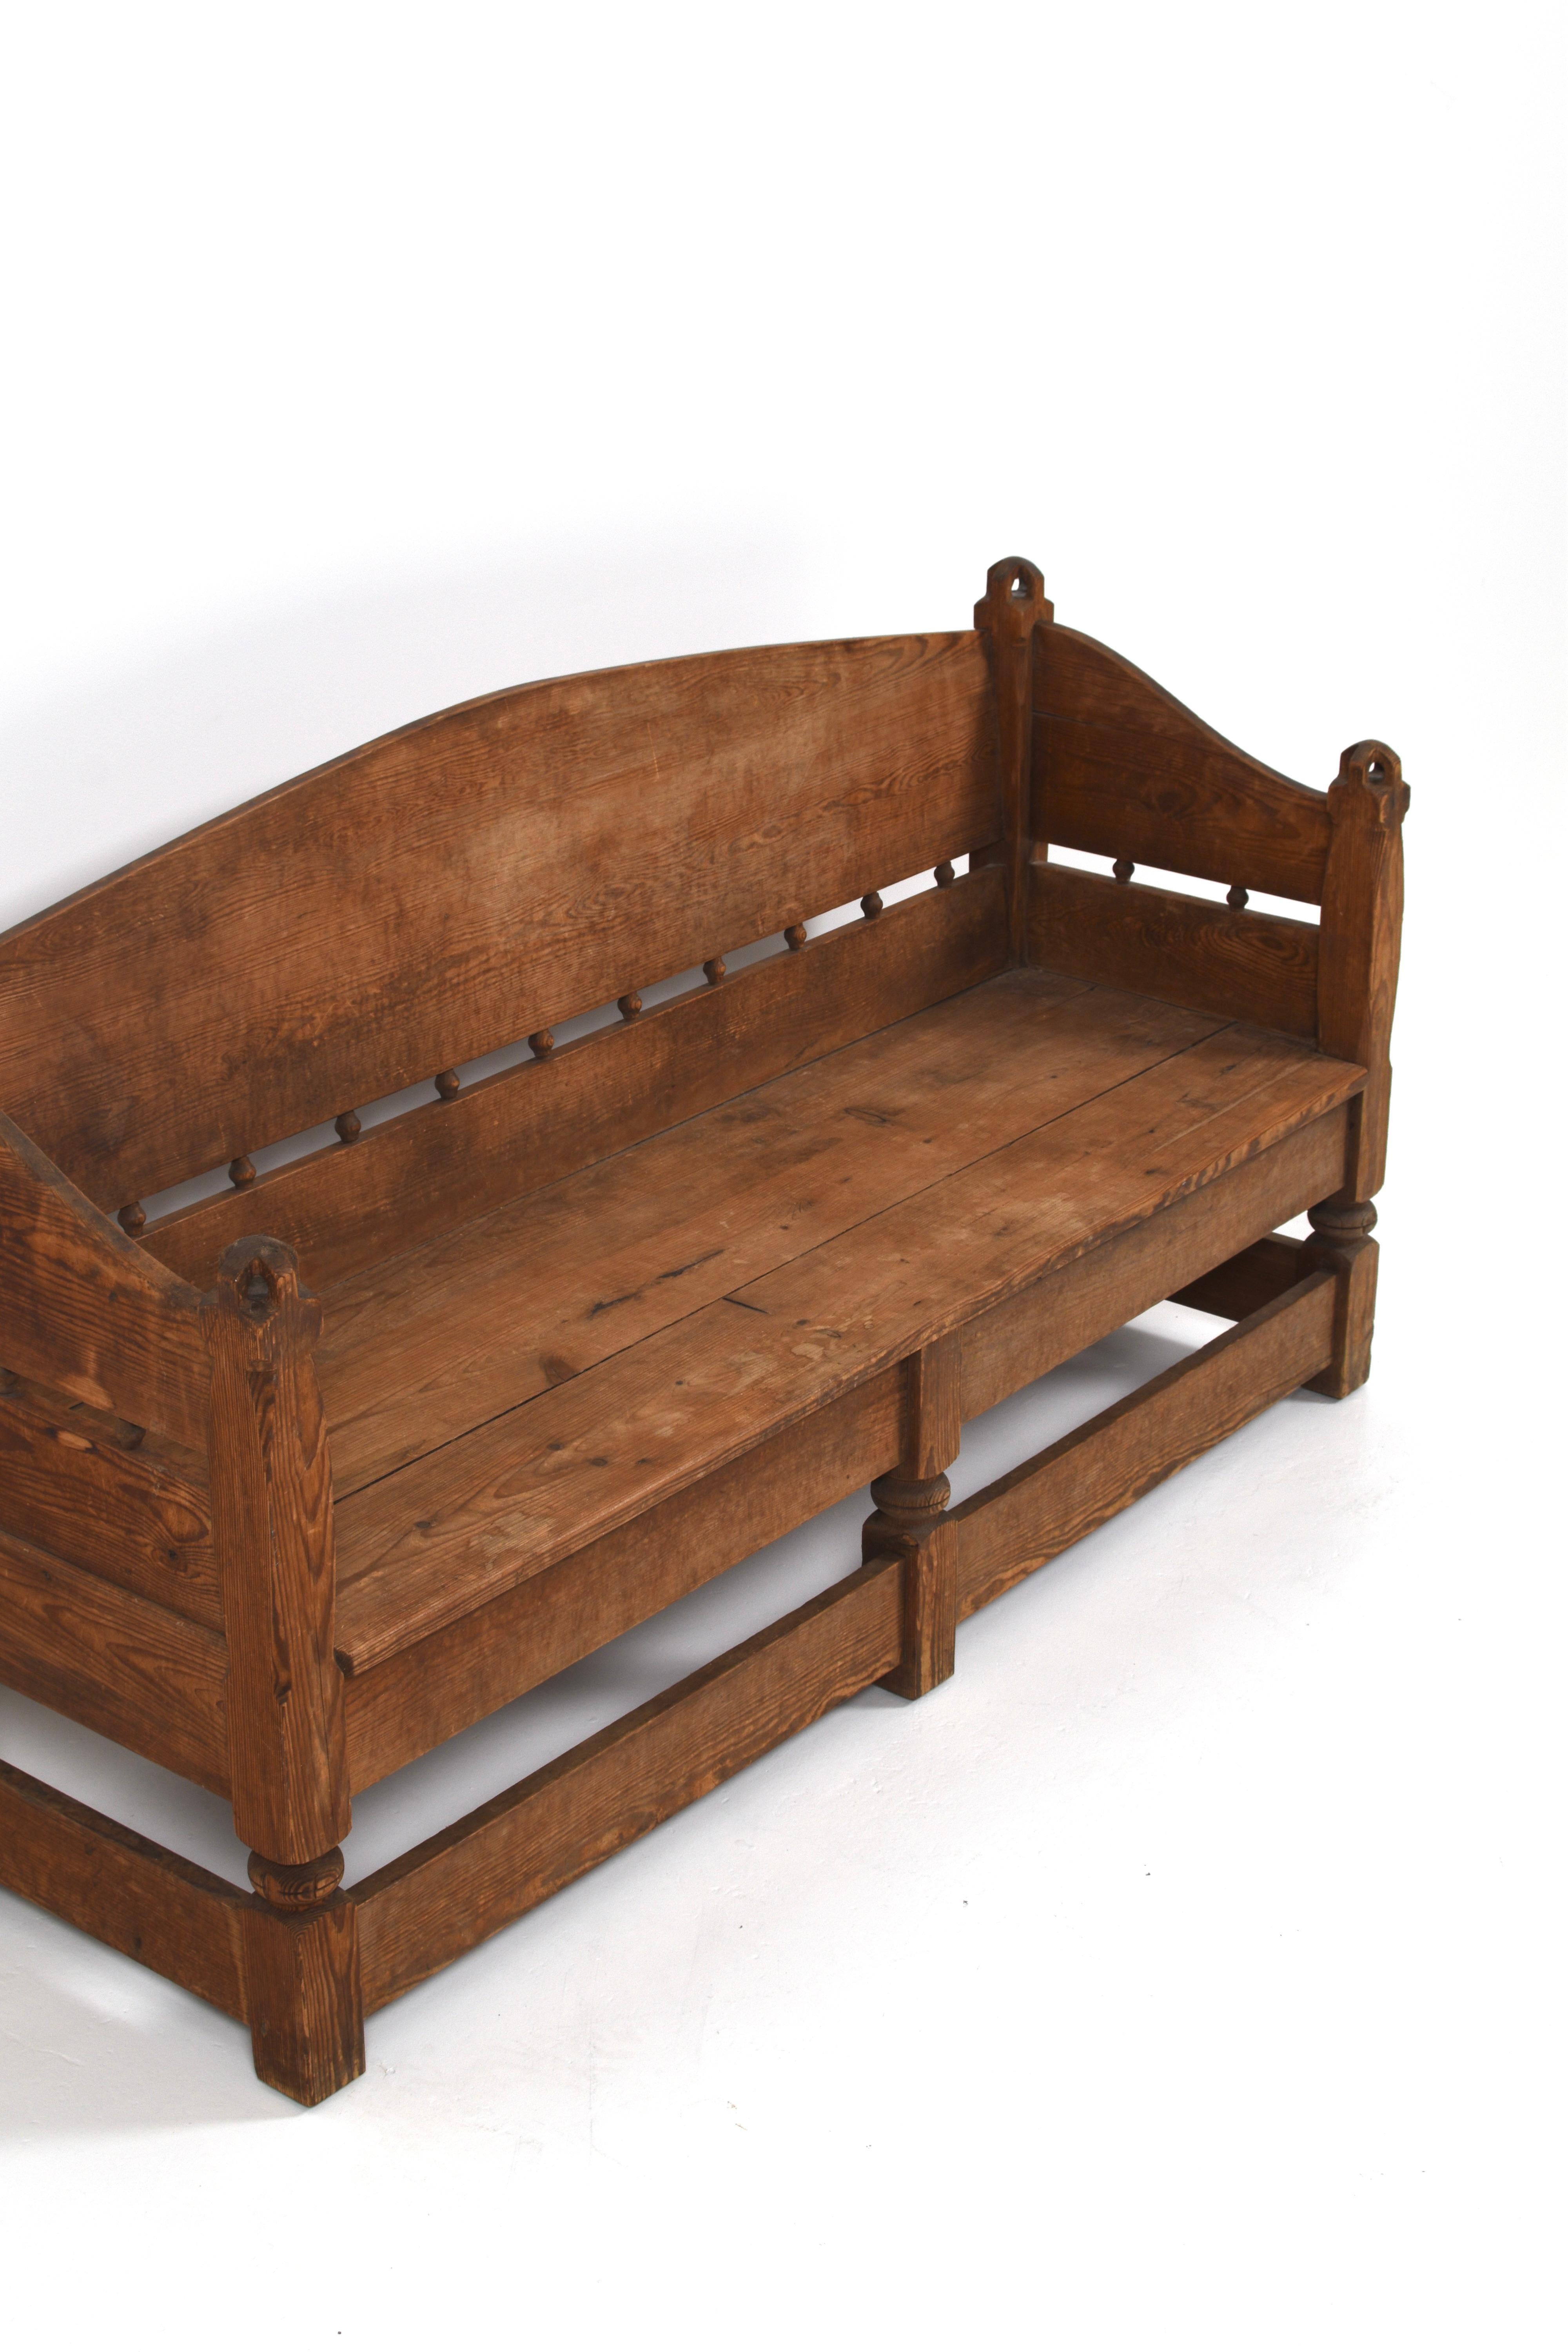 This antique Wabi-Sabi church bench in pine exudes a timeless charm, embodying the essence of Wabi-Sabi philosophy - the acceptance of imperfection. Crafted from pine, this bench carries the marks of age and wear, adding character and authenticity